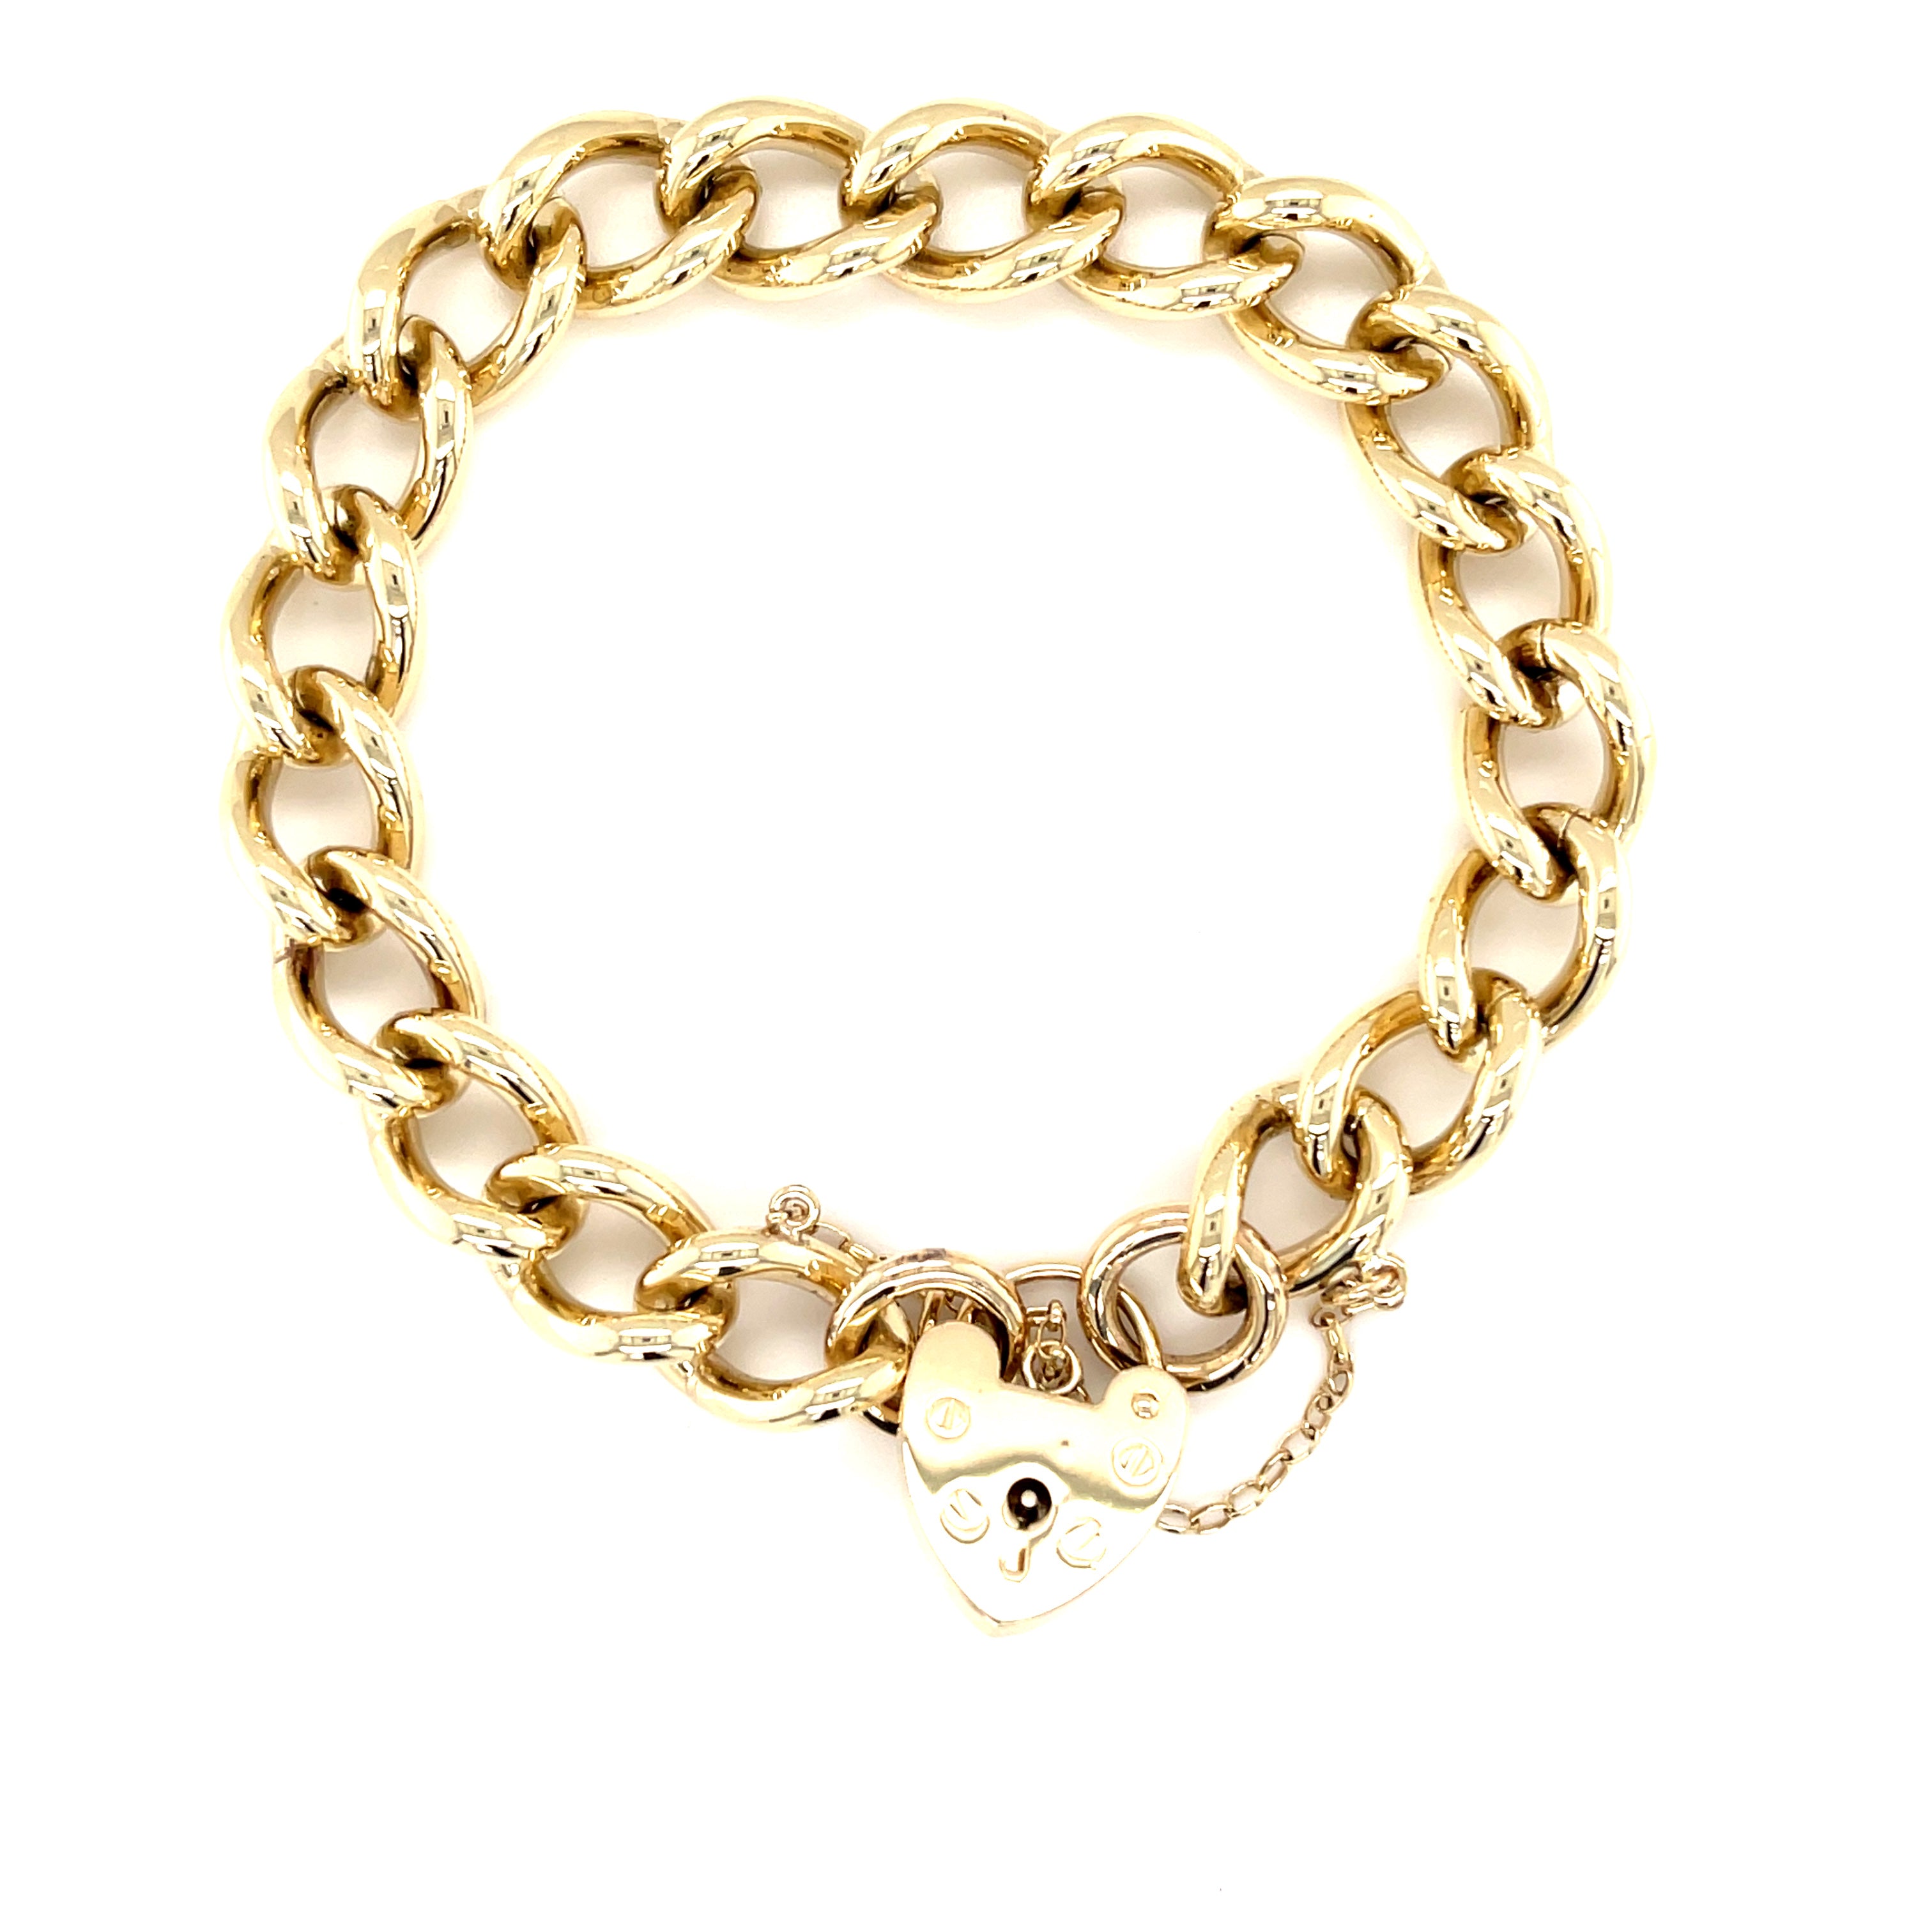 9ct Yellow Gold 7" Heavy Traditional Charm Bracelet - 46.76g